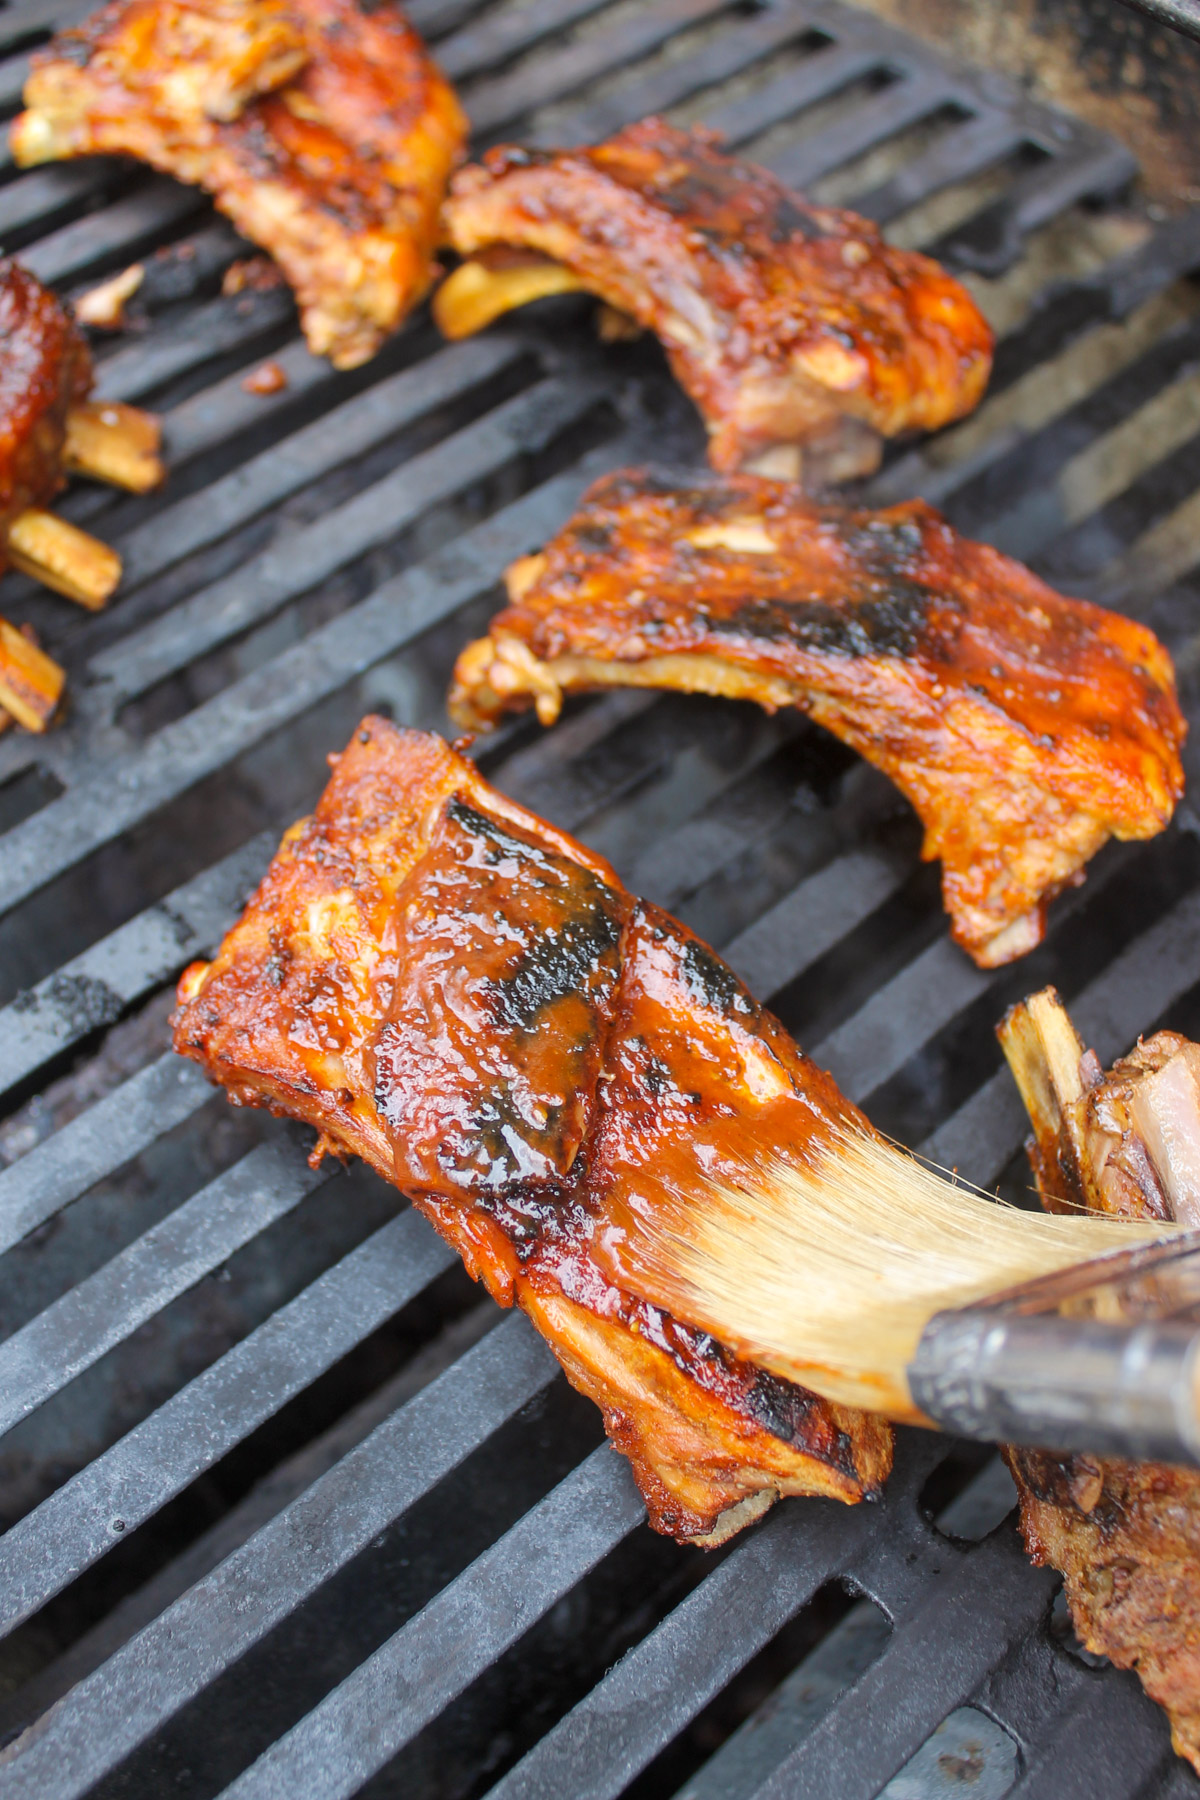 Ribs on the grill being brushed with barbecue sauce.